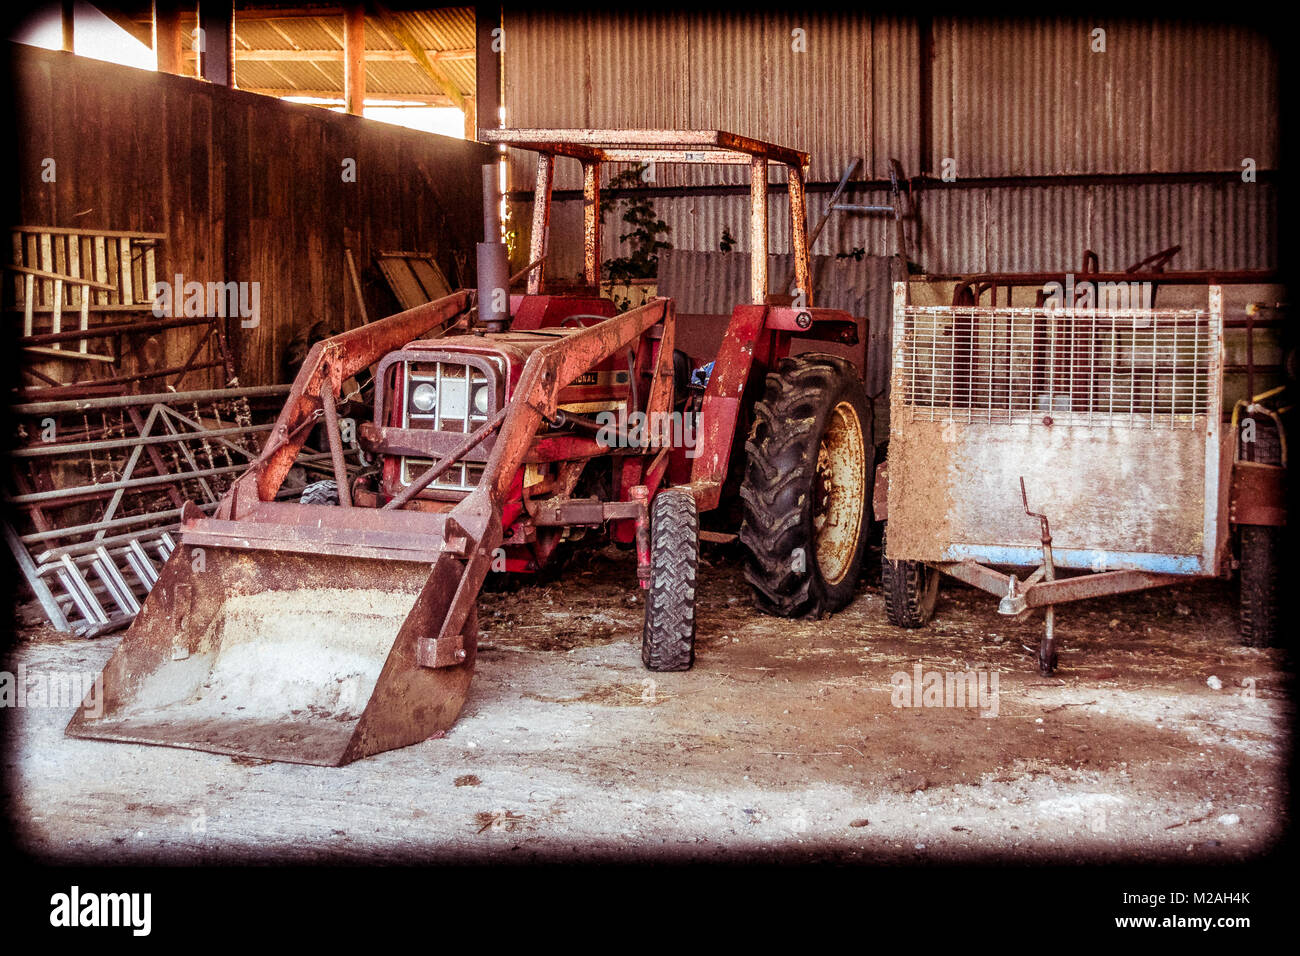 Vintage International Tractor in a farmers barn, in Dorset UK Stock Photo